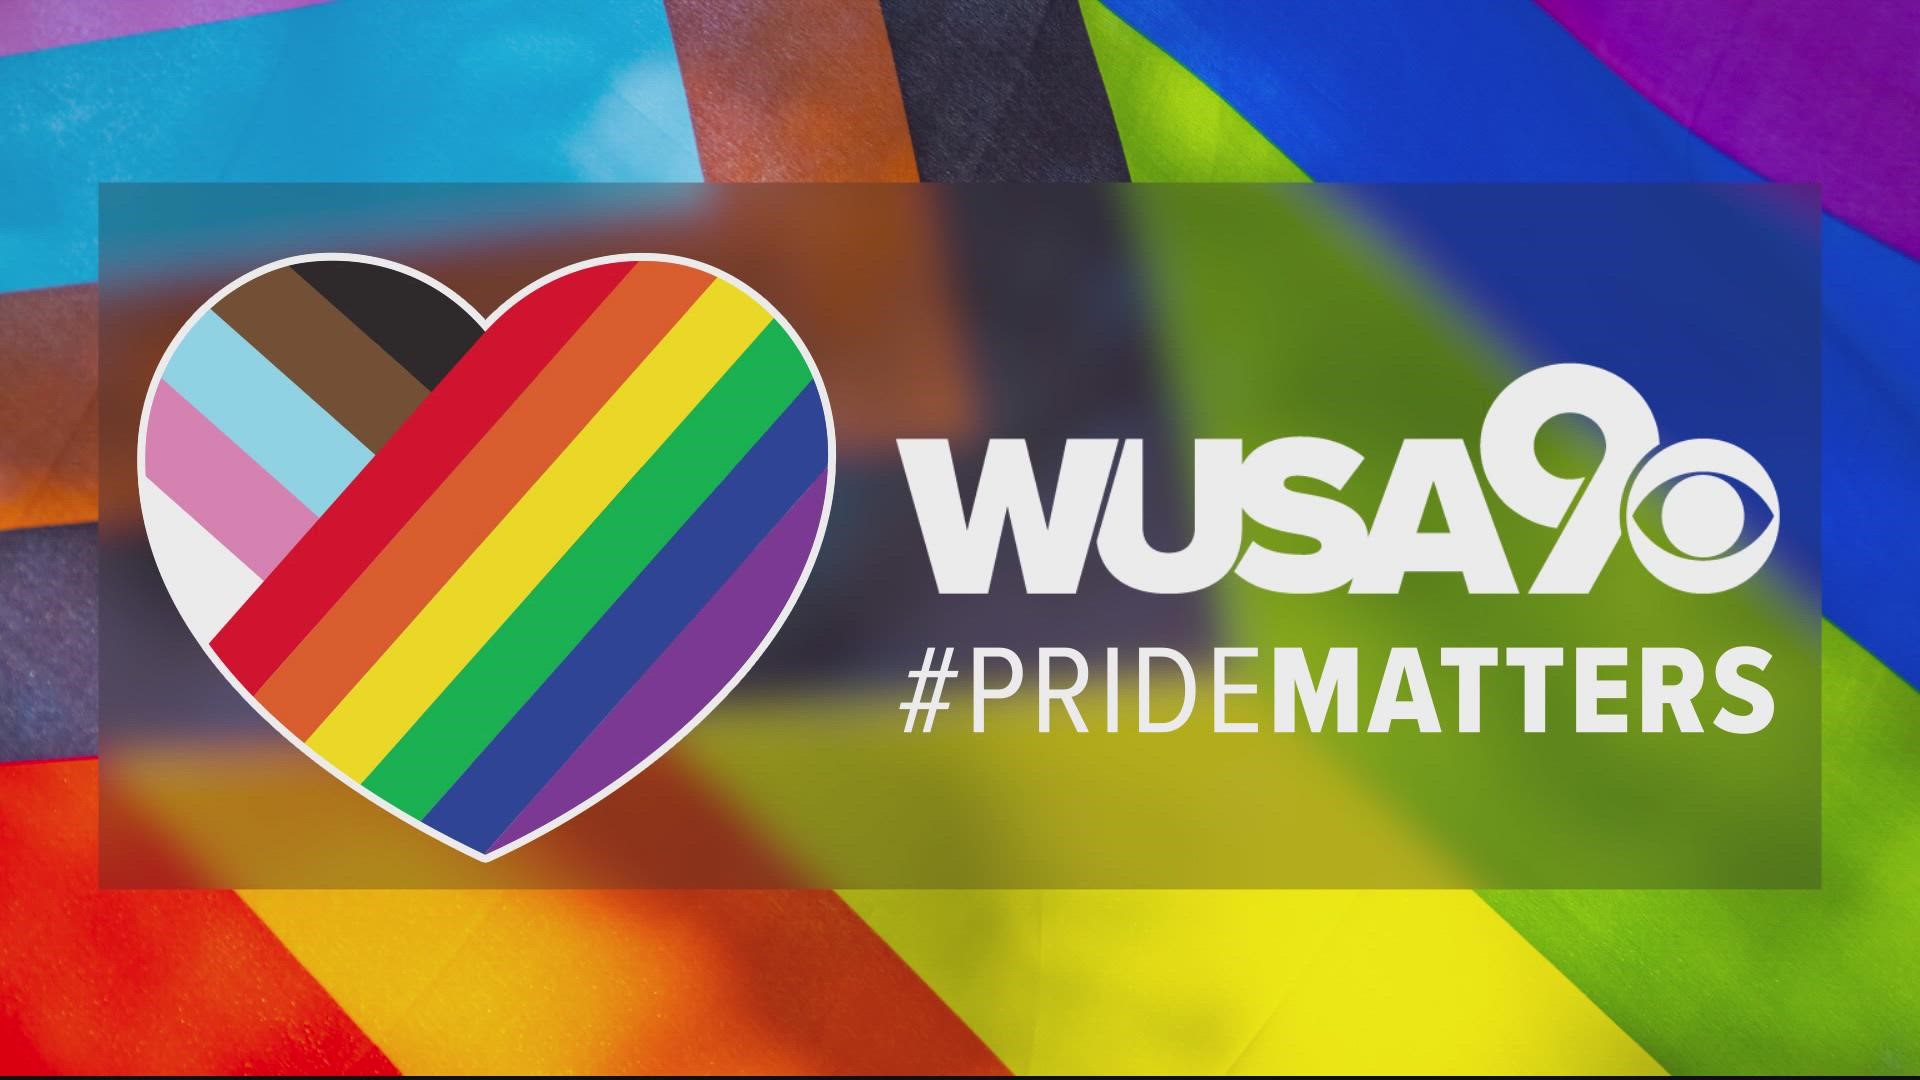 Lorenzo Hall and the WUSA9 team bring you stories of firsts, fashion, faith end even flag football as we recognize Pride Month.